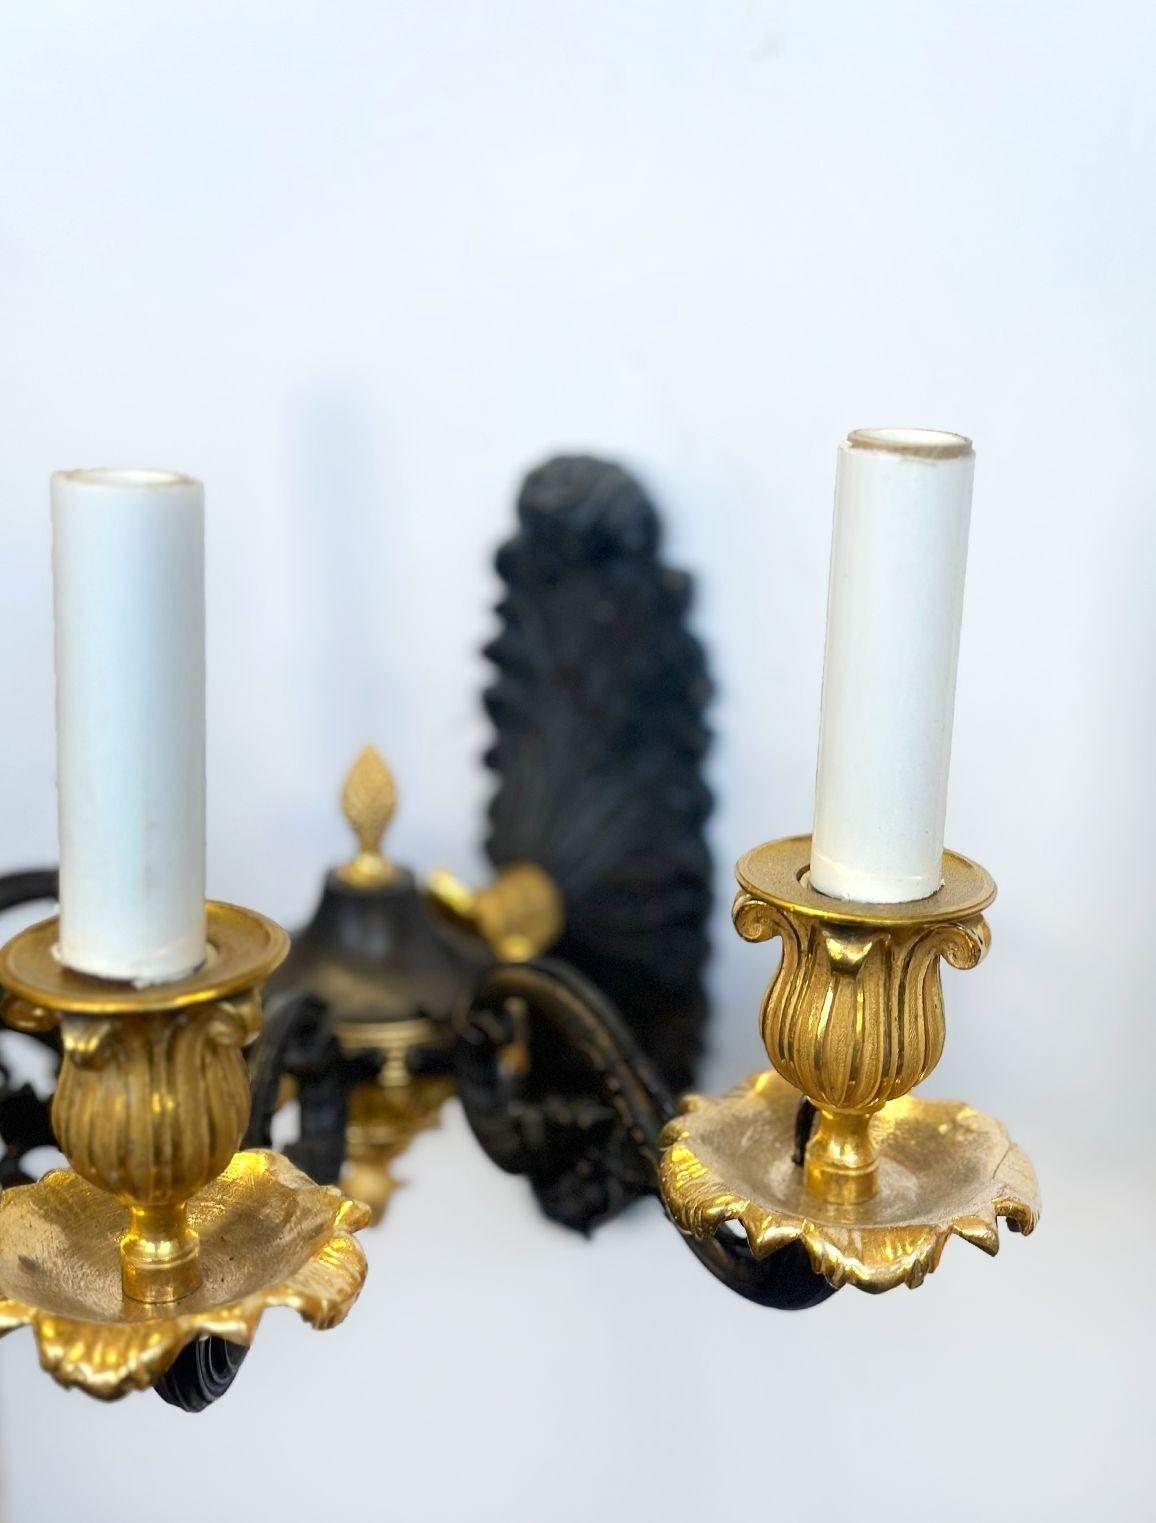 Pair of bronze Empire-style sconces made in France in the late 19th Century. These are made of quality bronze and D'ore bronze touches all around including the bobeches, candle cups, and other details. The sconces feature four arms and each include